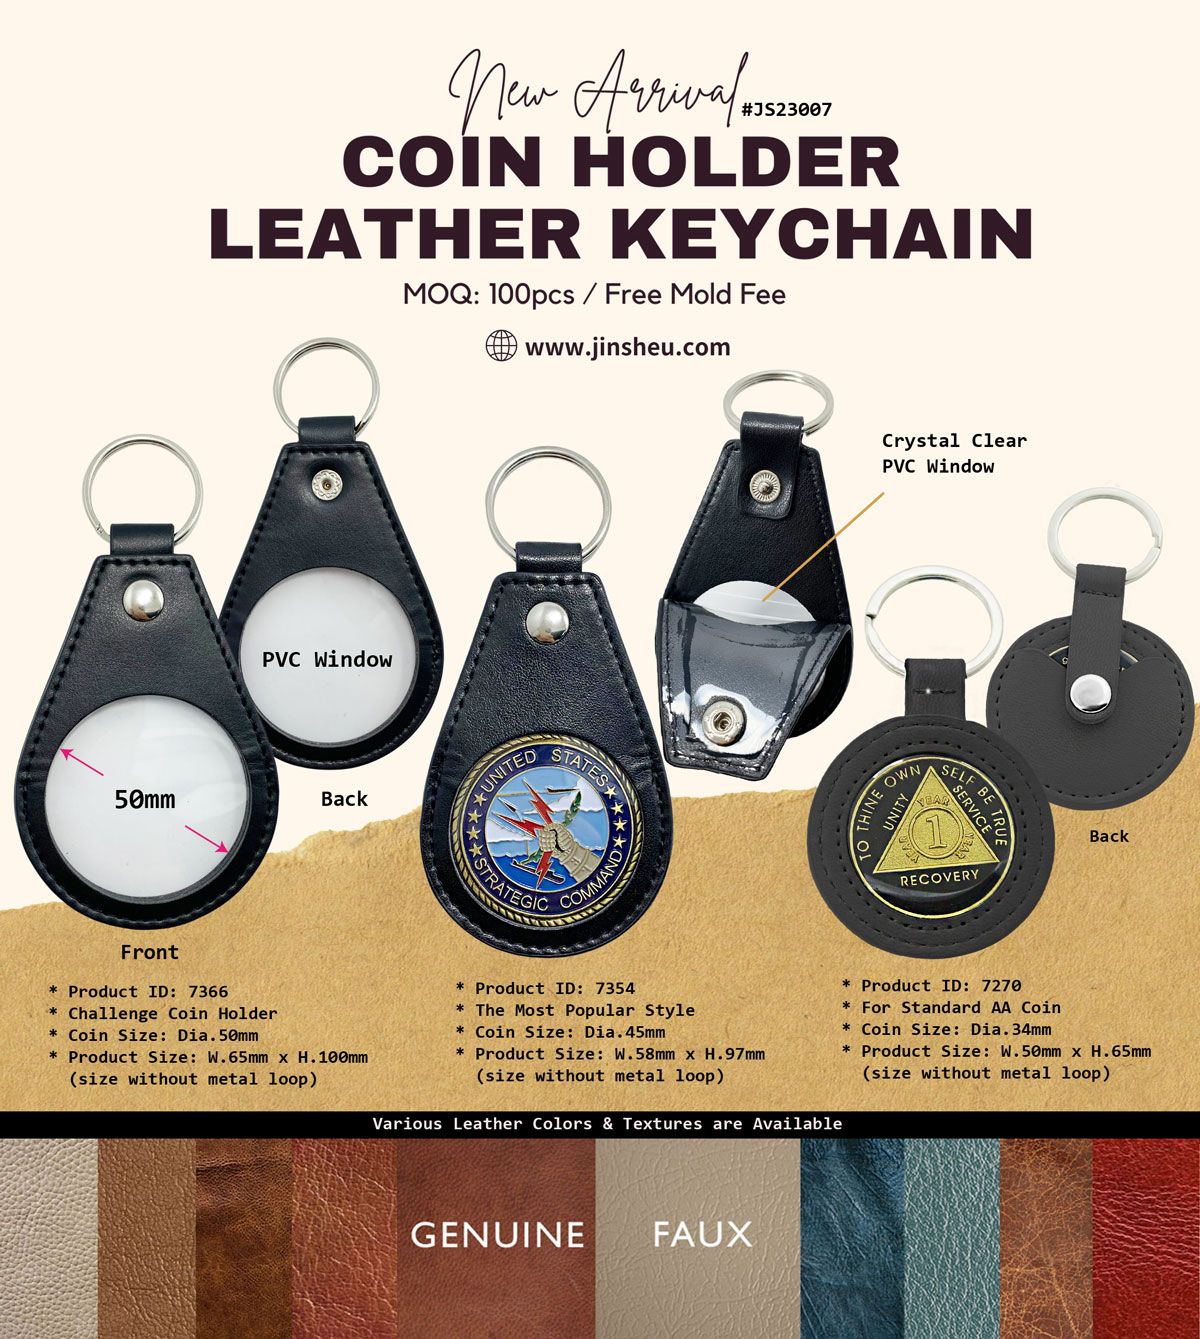 High quality leather challenge coin holder keyrings